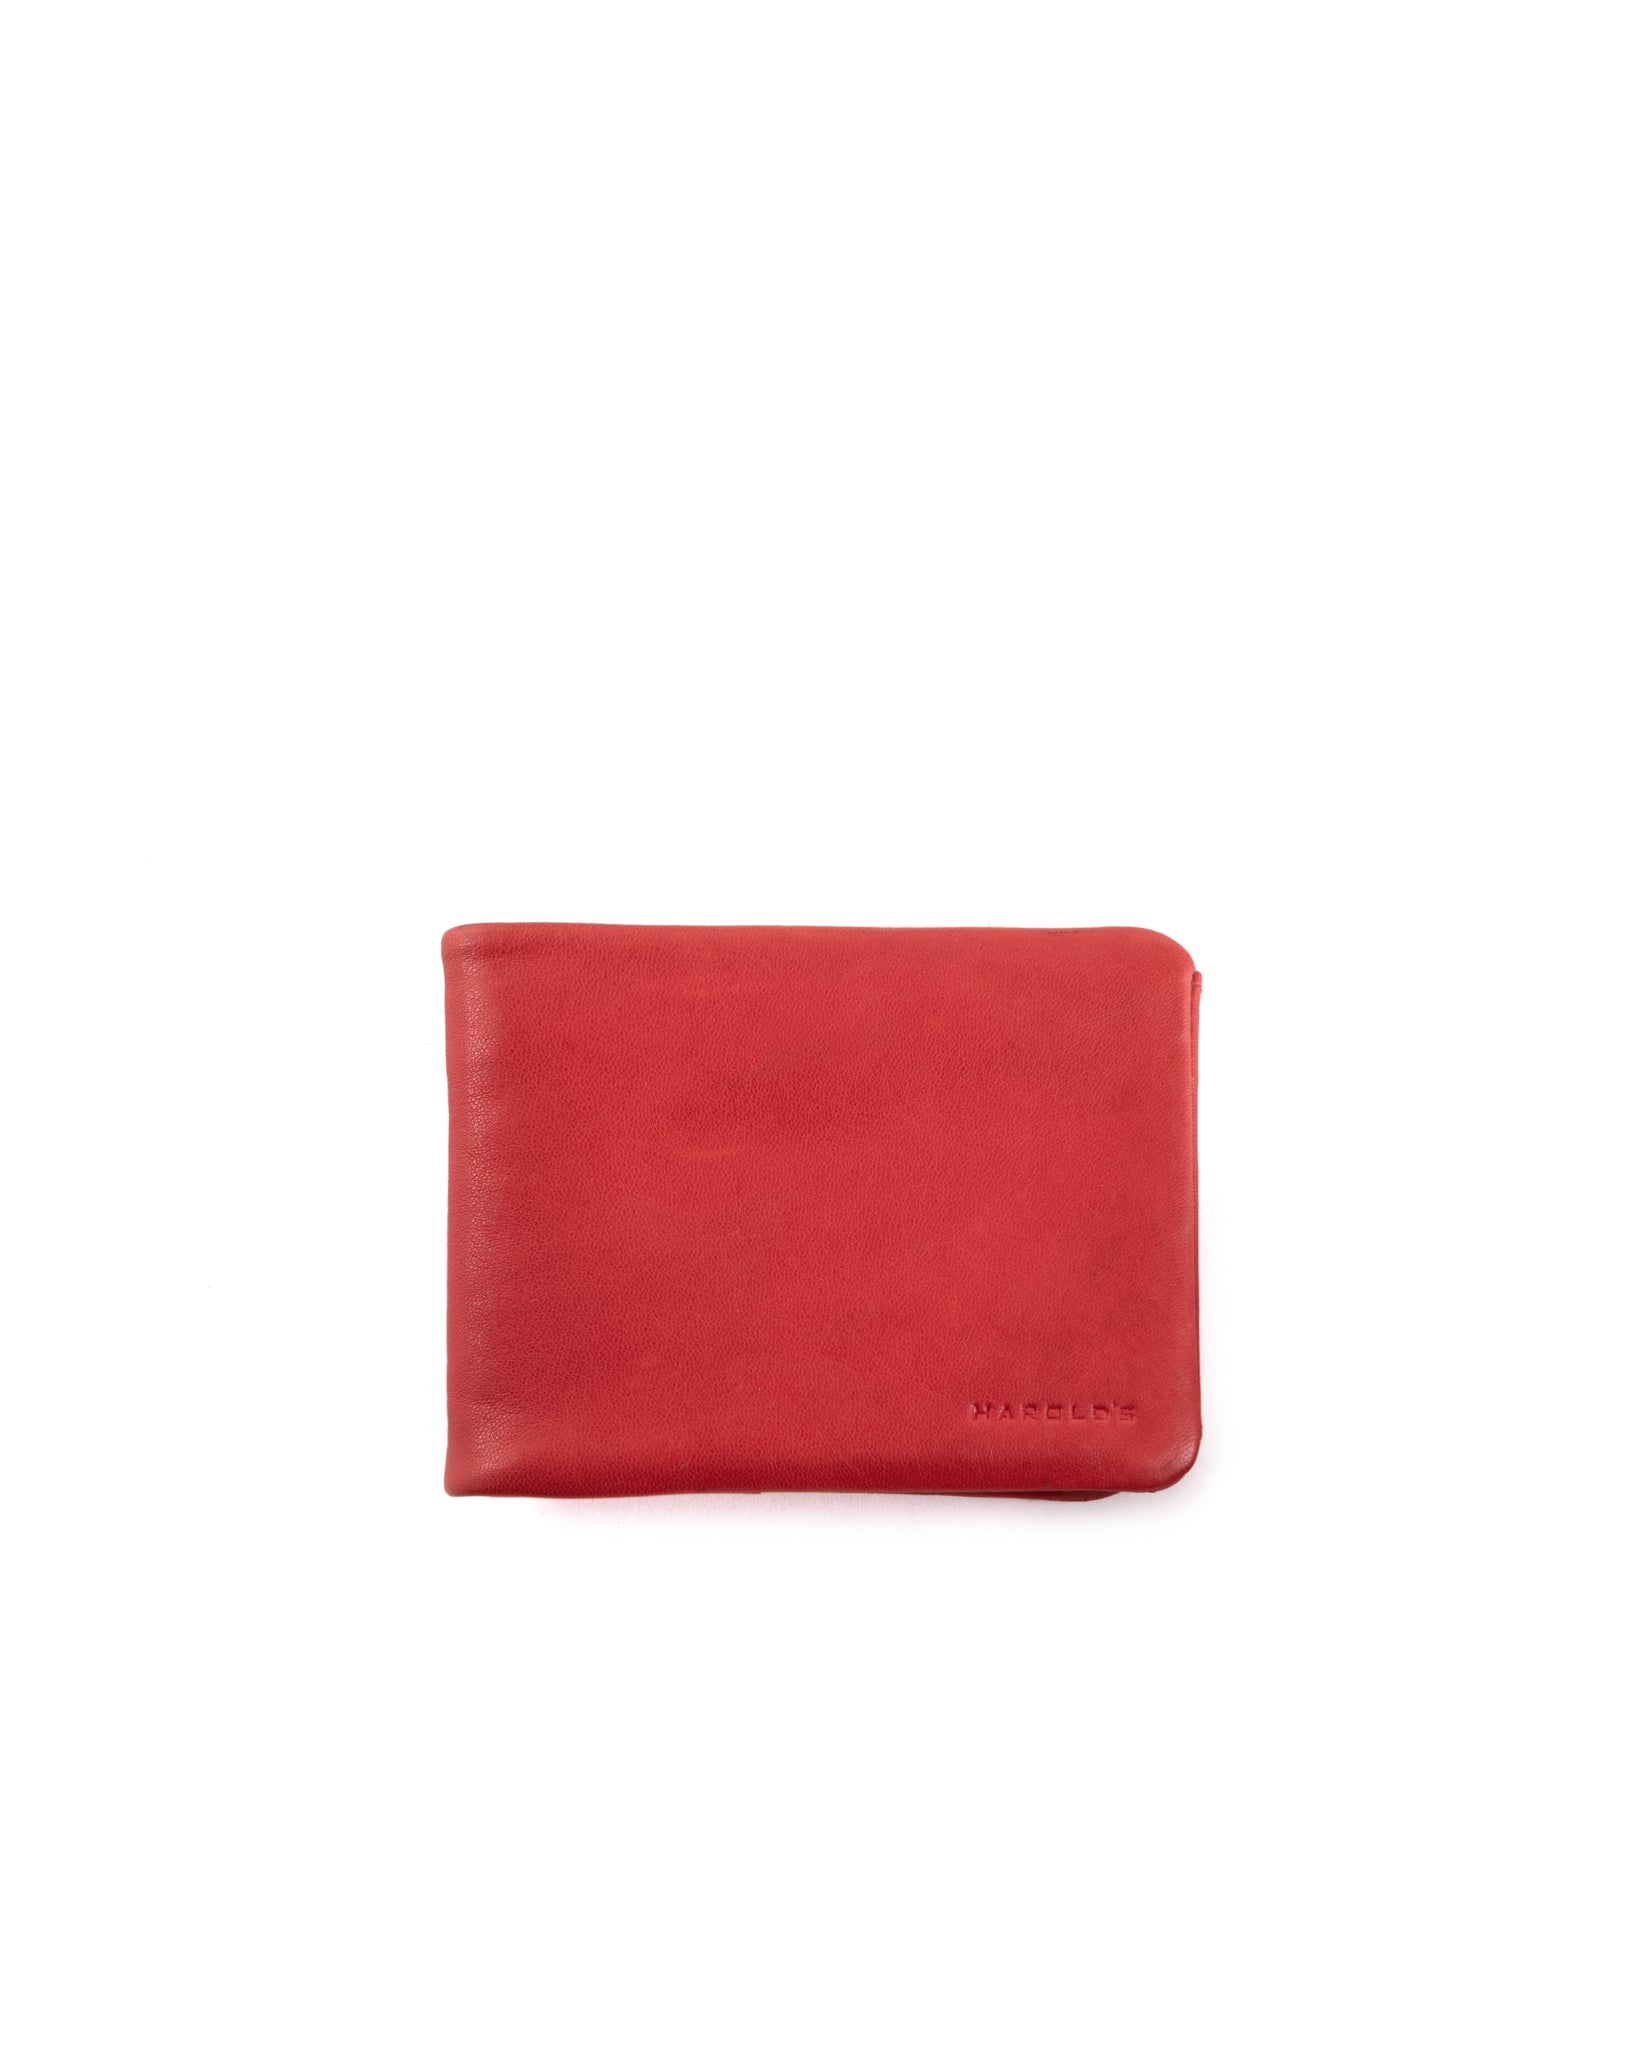 Chacoral Soft wallet classic